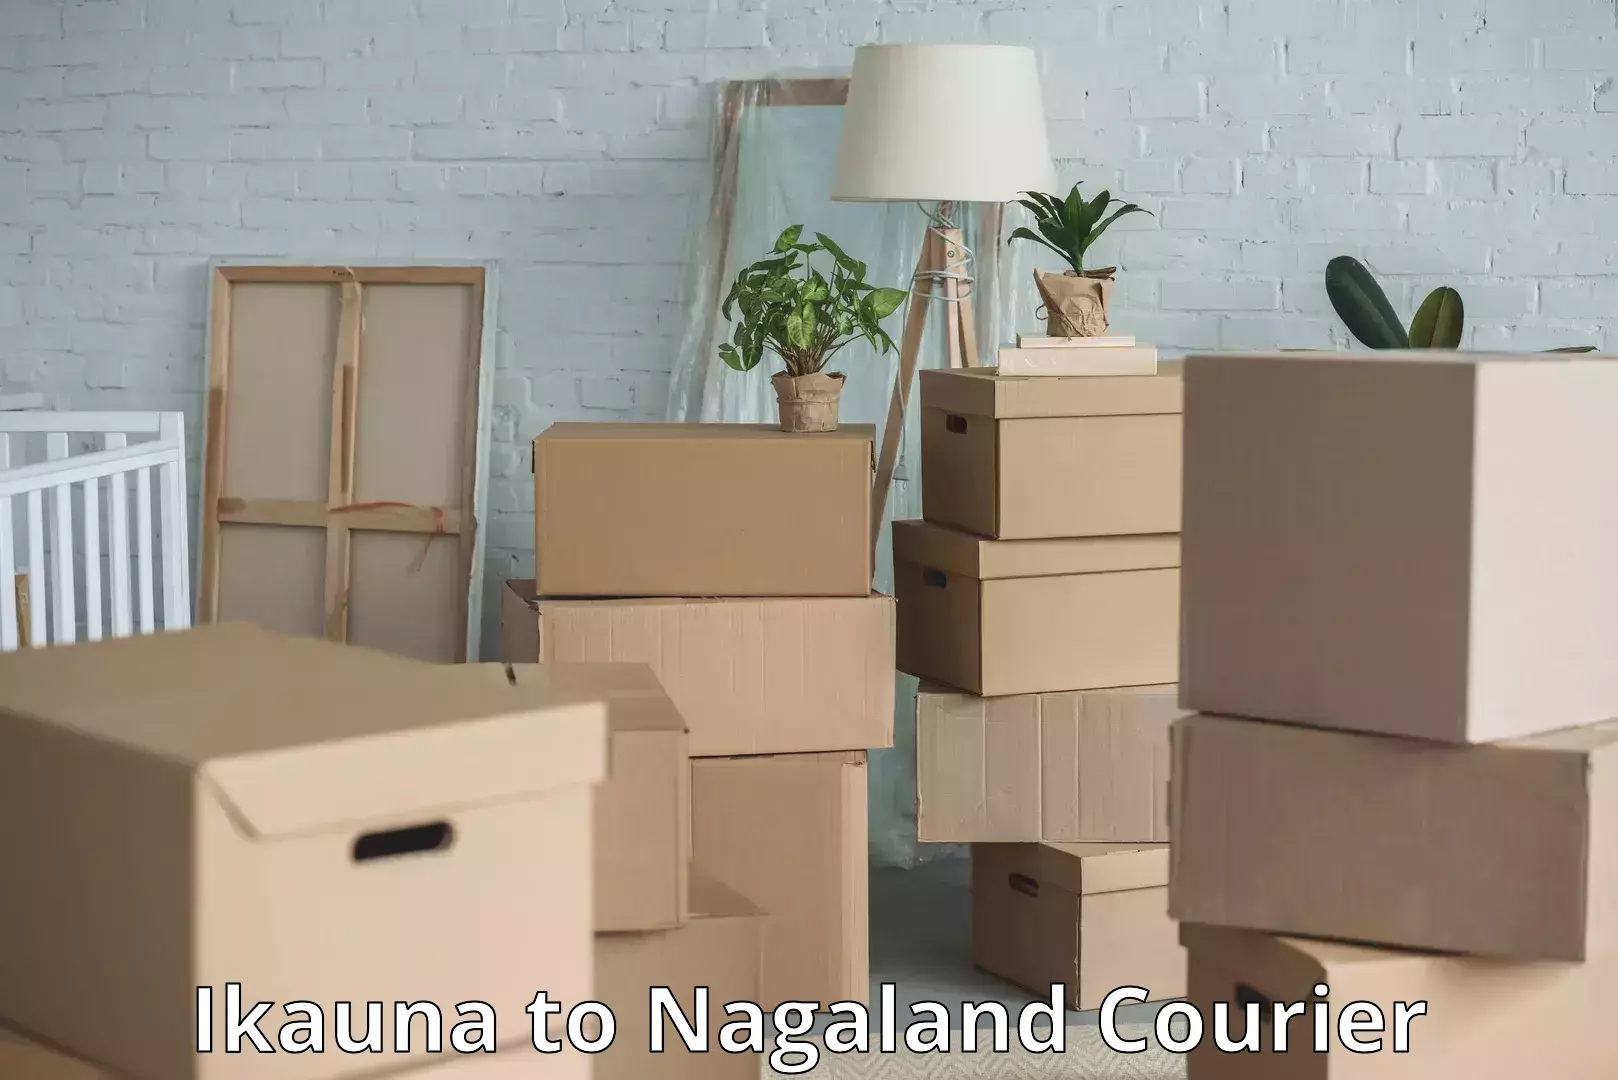 Personal luggage delivery in Ikauna to Nagaland